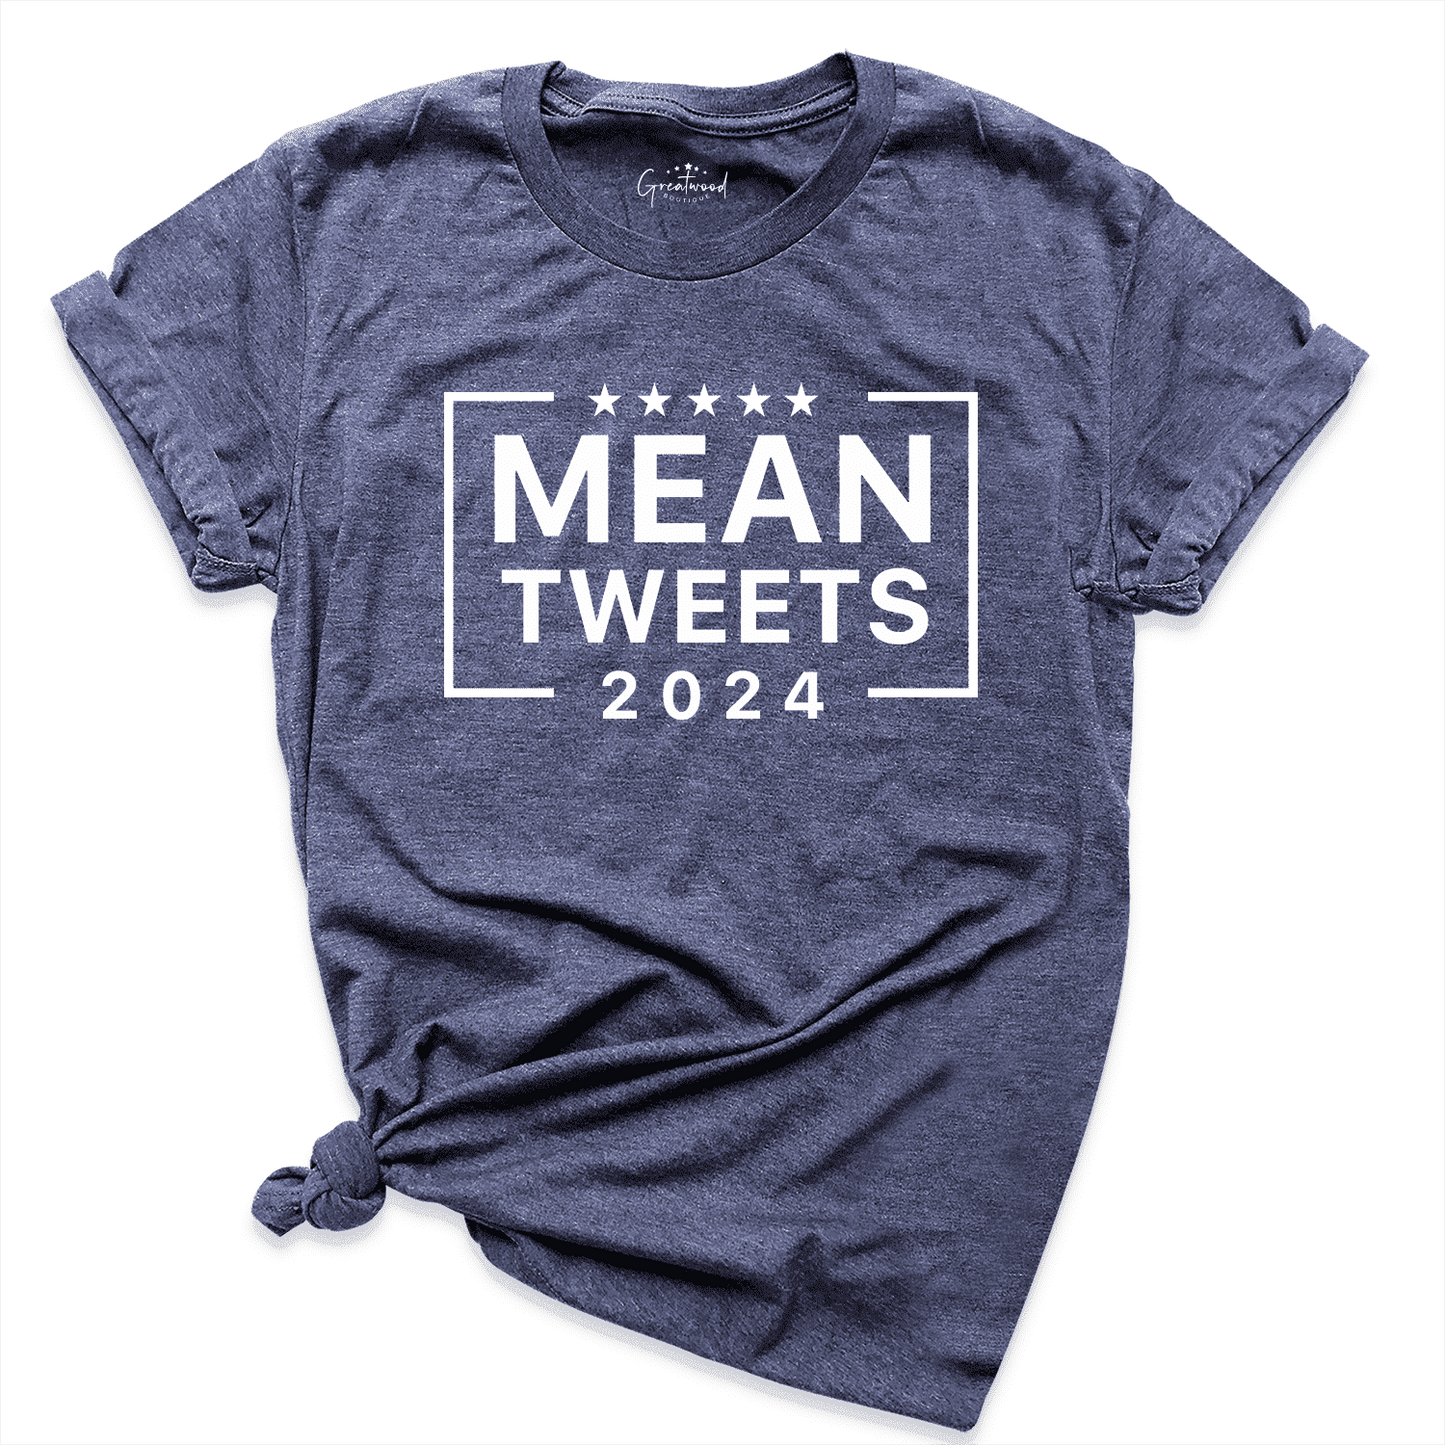 Mean Tweets Shirt Navy - Greatwood Boutique